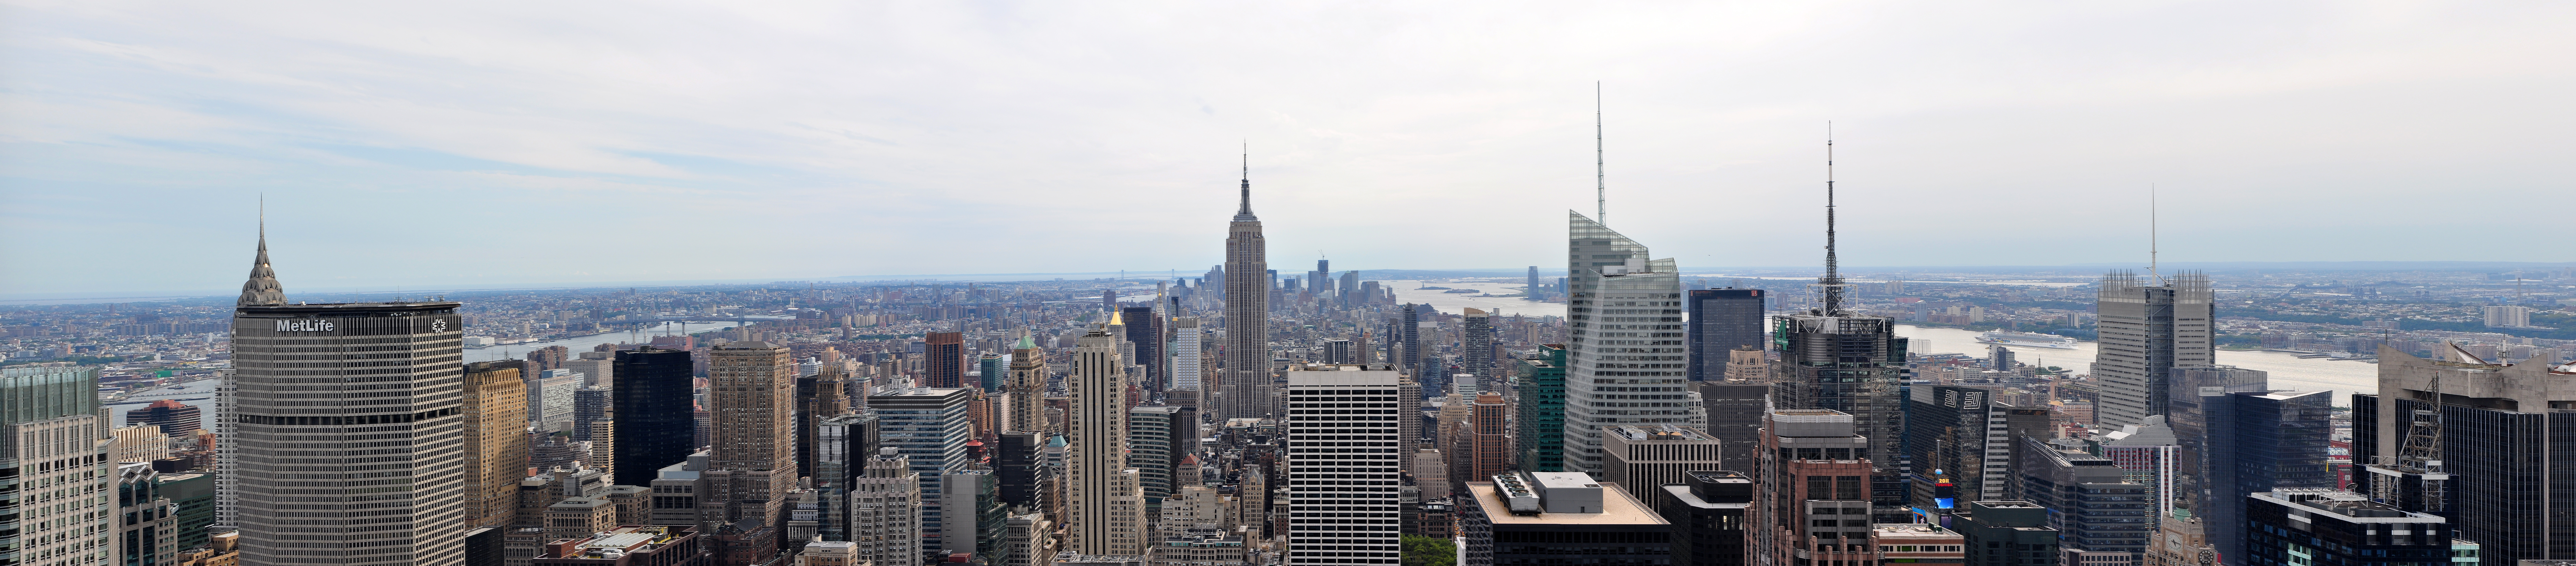 Panorama of New York City with Empire State Building